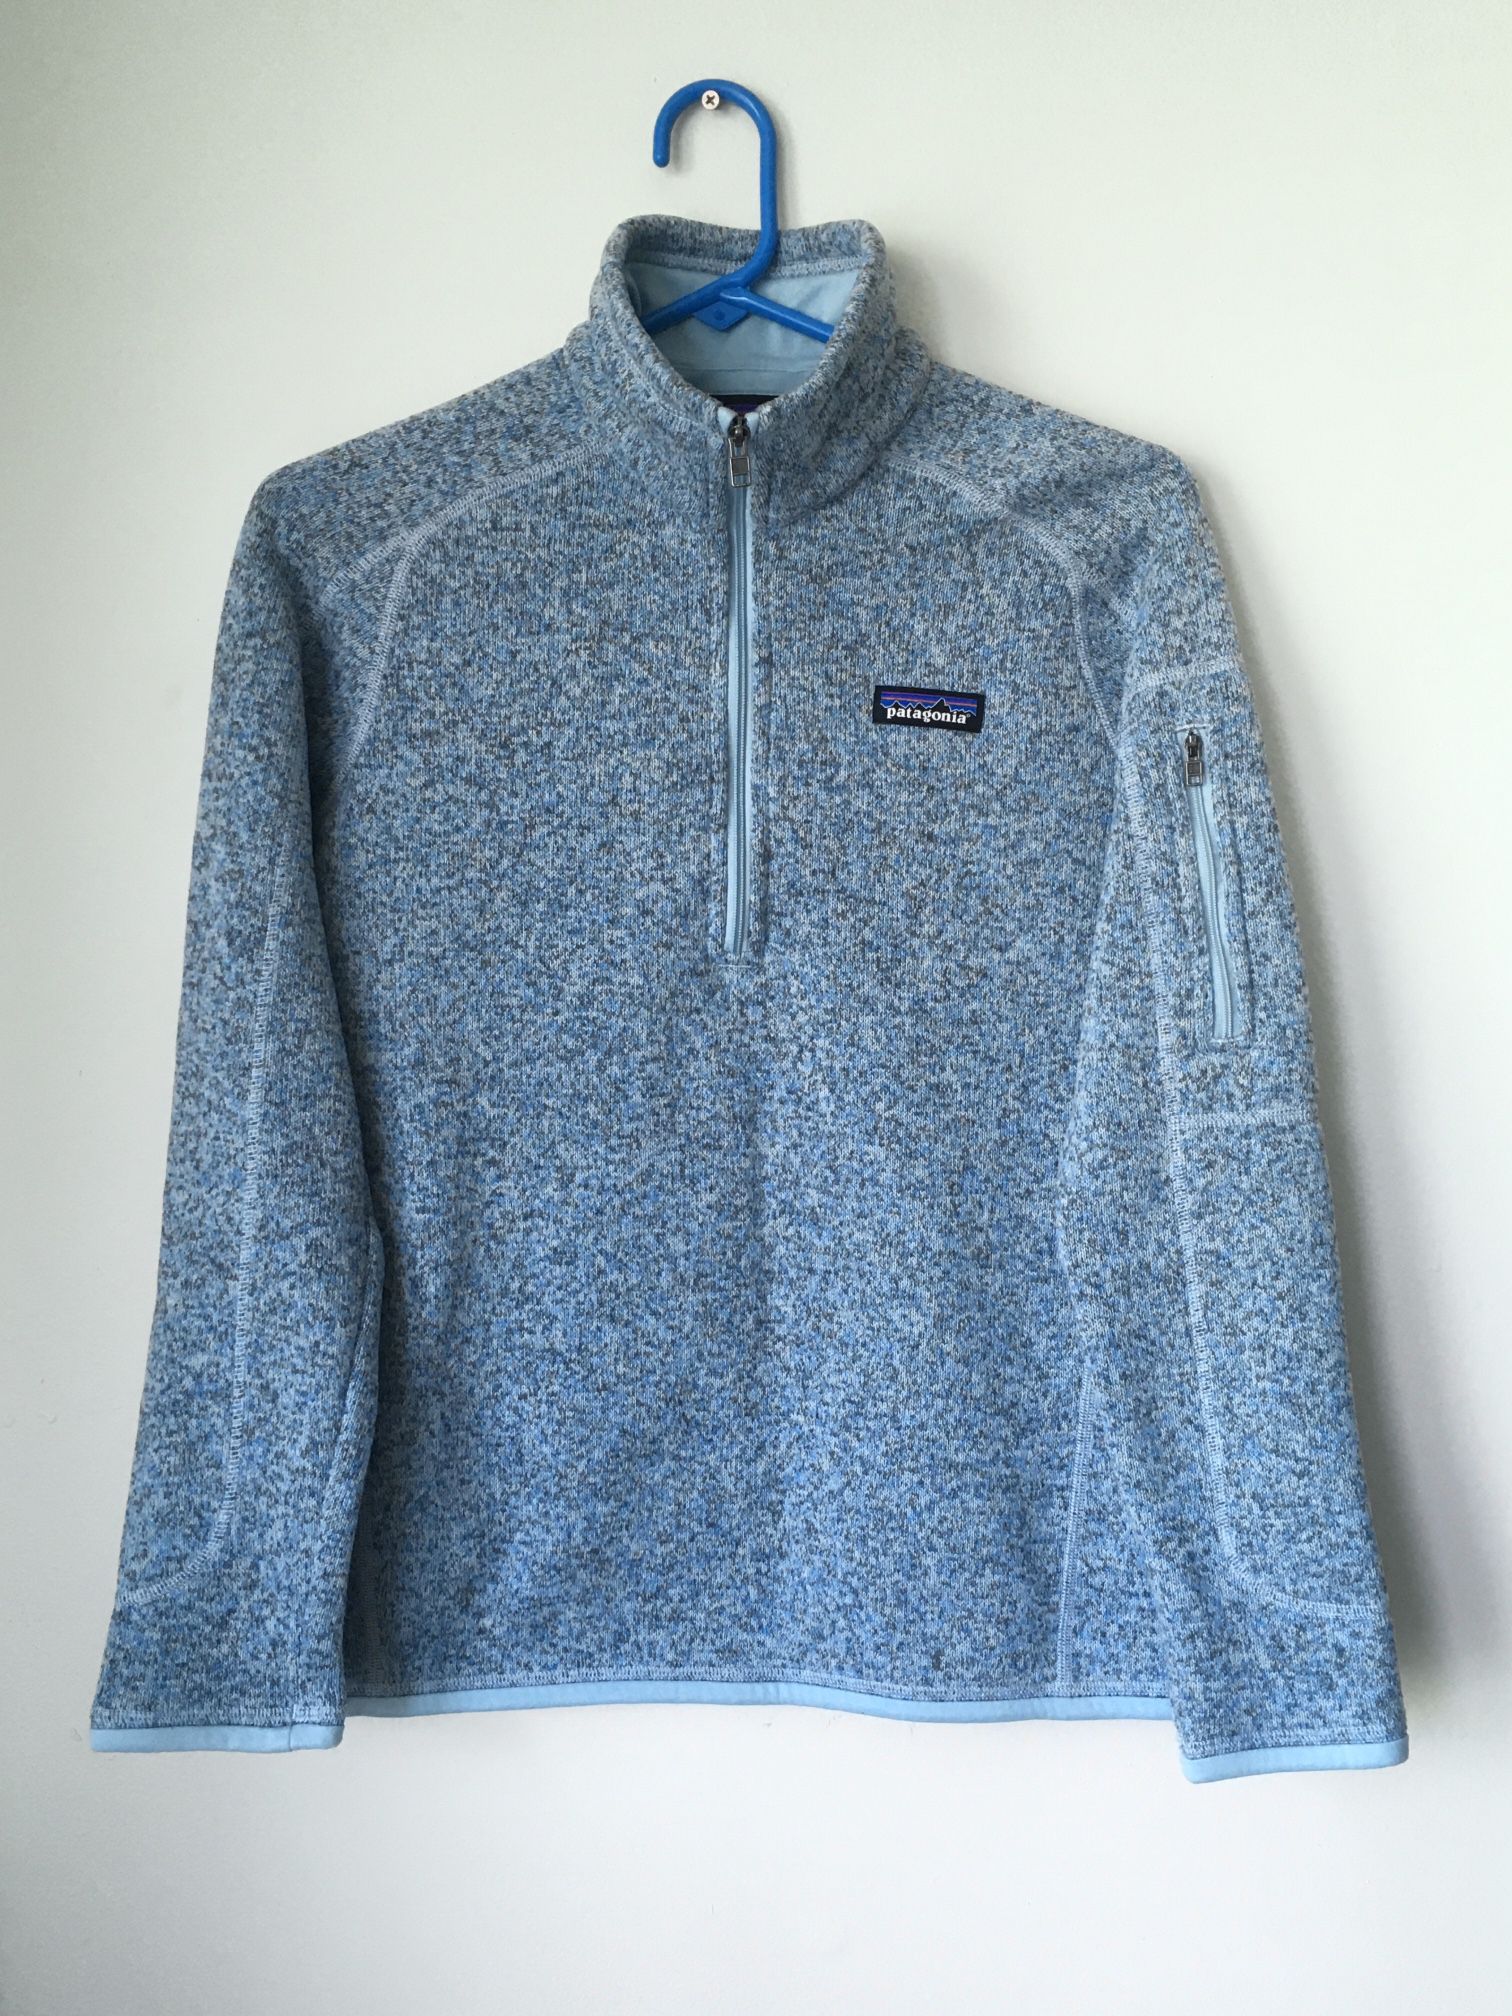 Patagonia Women ‘s Sweater. Very Good quality . Size S .